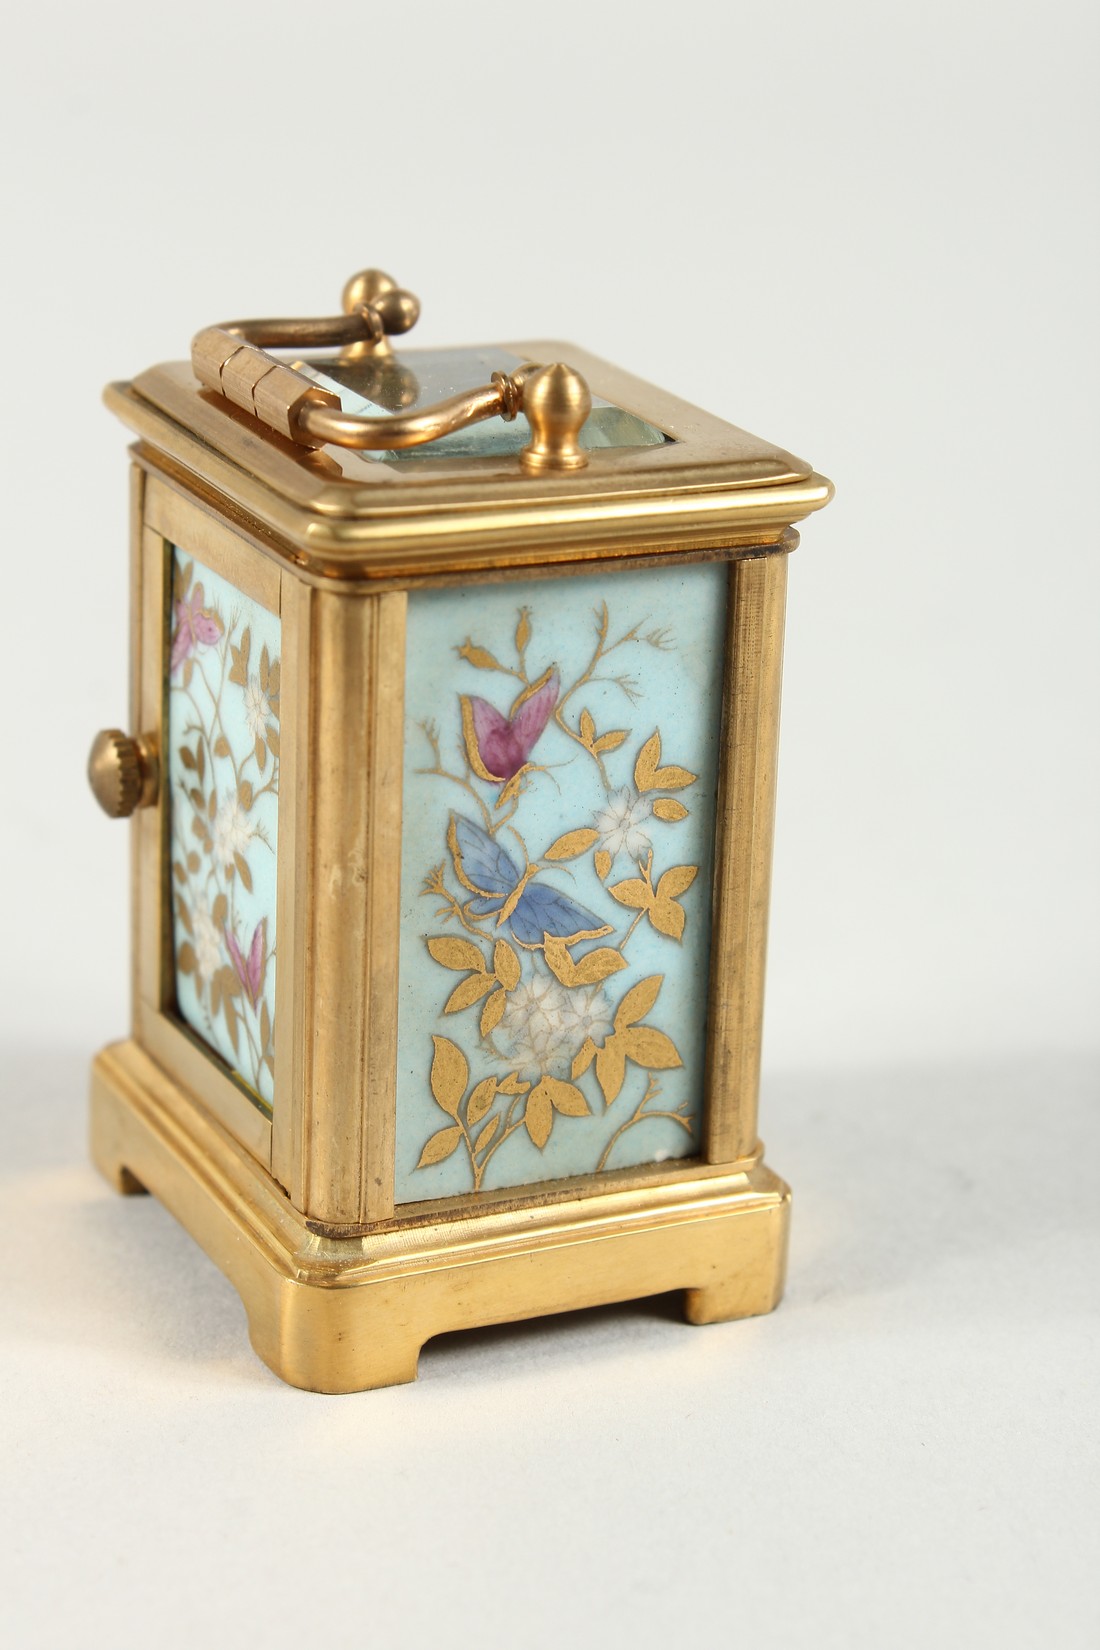 A MINIATURE SEVRES CARRIAGE CLOCK with flora porcelain panels. 2.25ins high. - Image 4 of 7